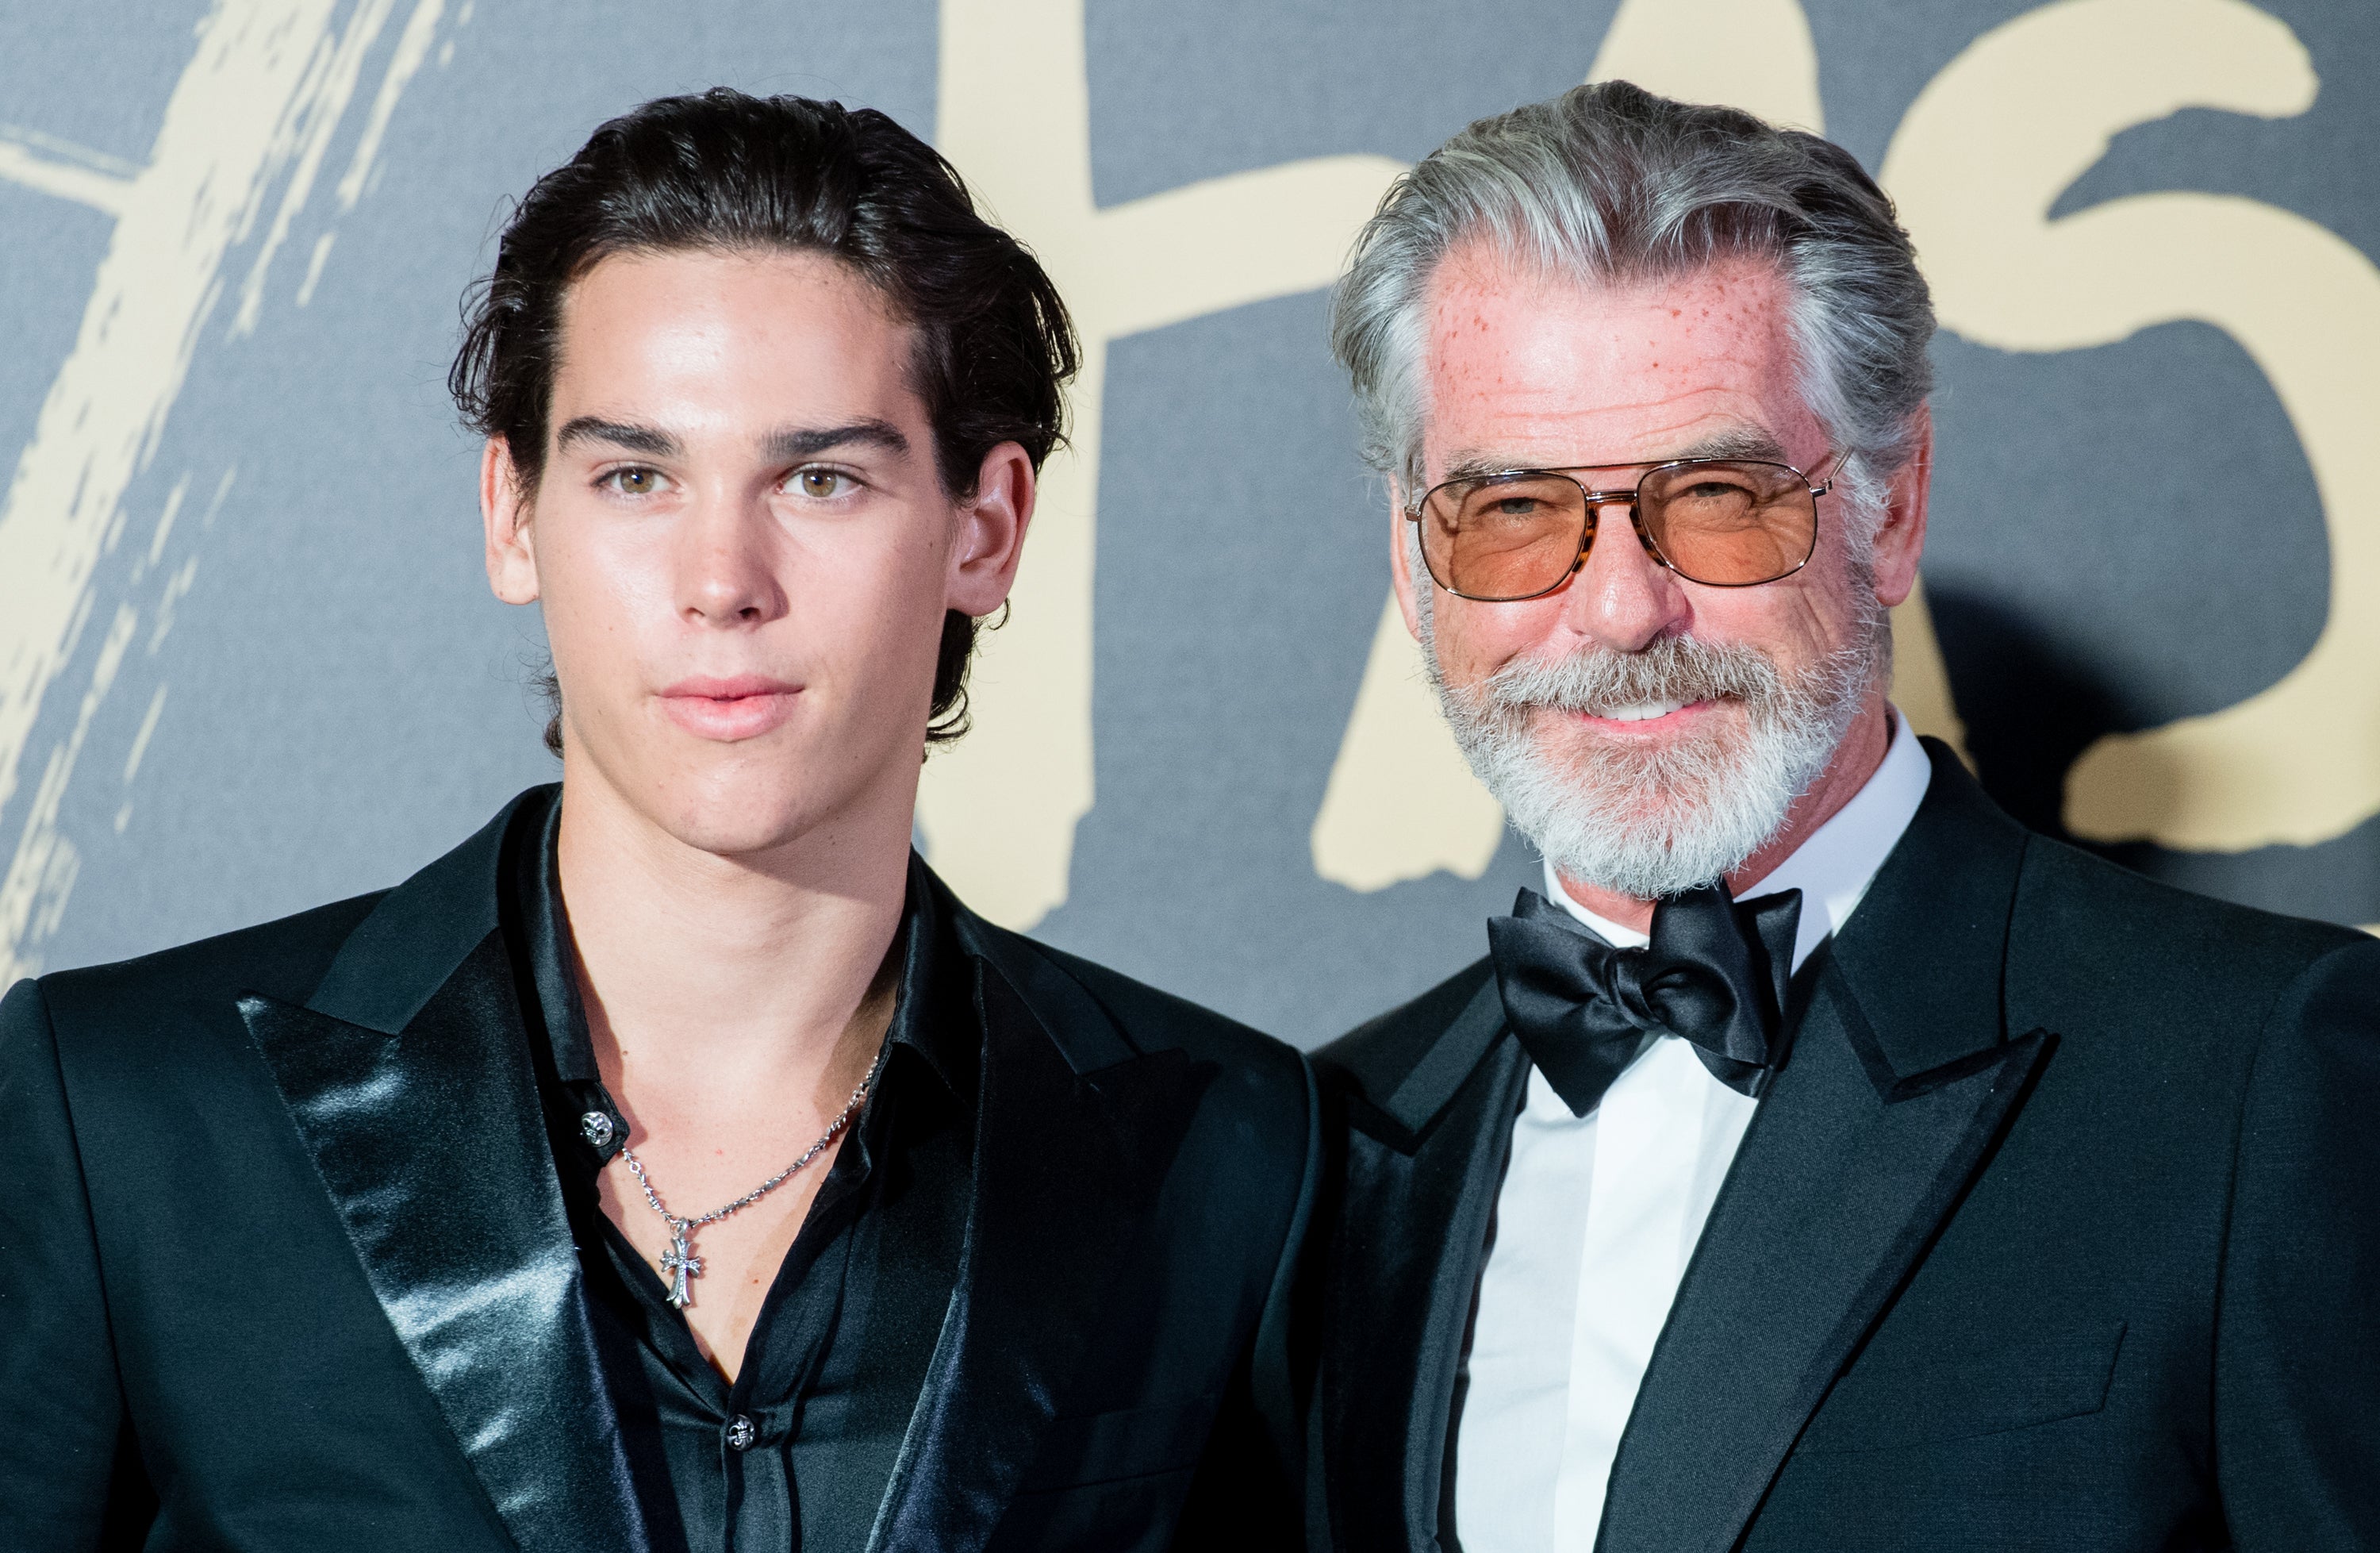 Pierce Brosnan S Son Will Have You Seeing Double At London Fashion Week Pic Entertainment Tonight